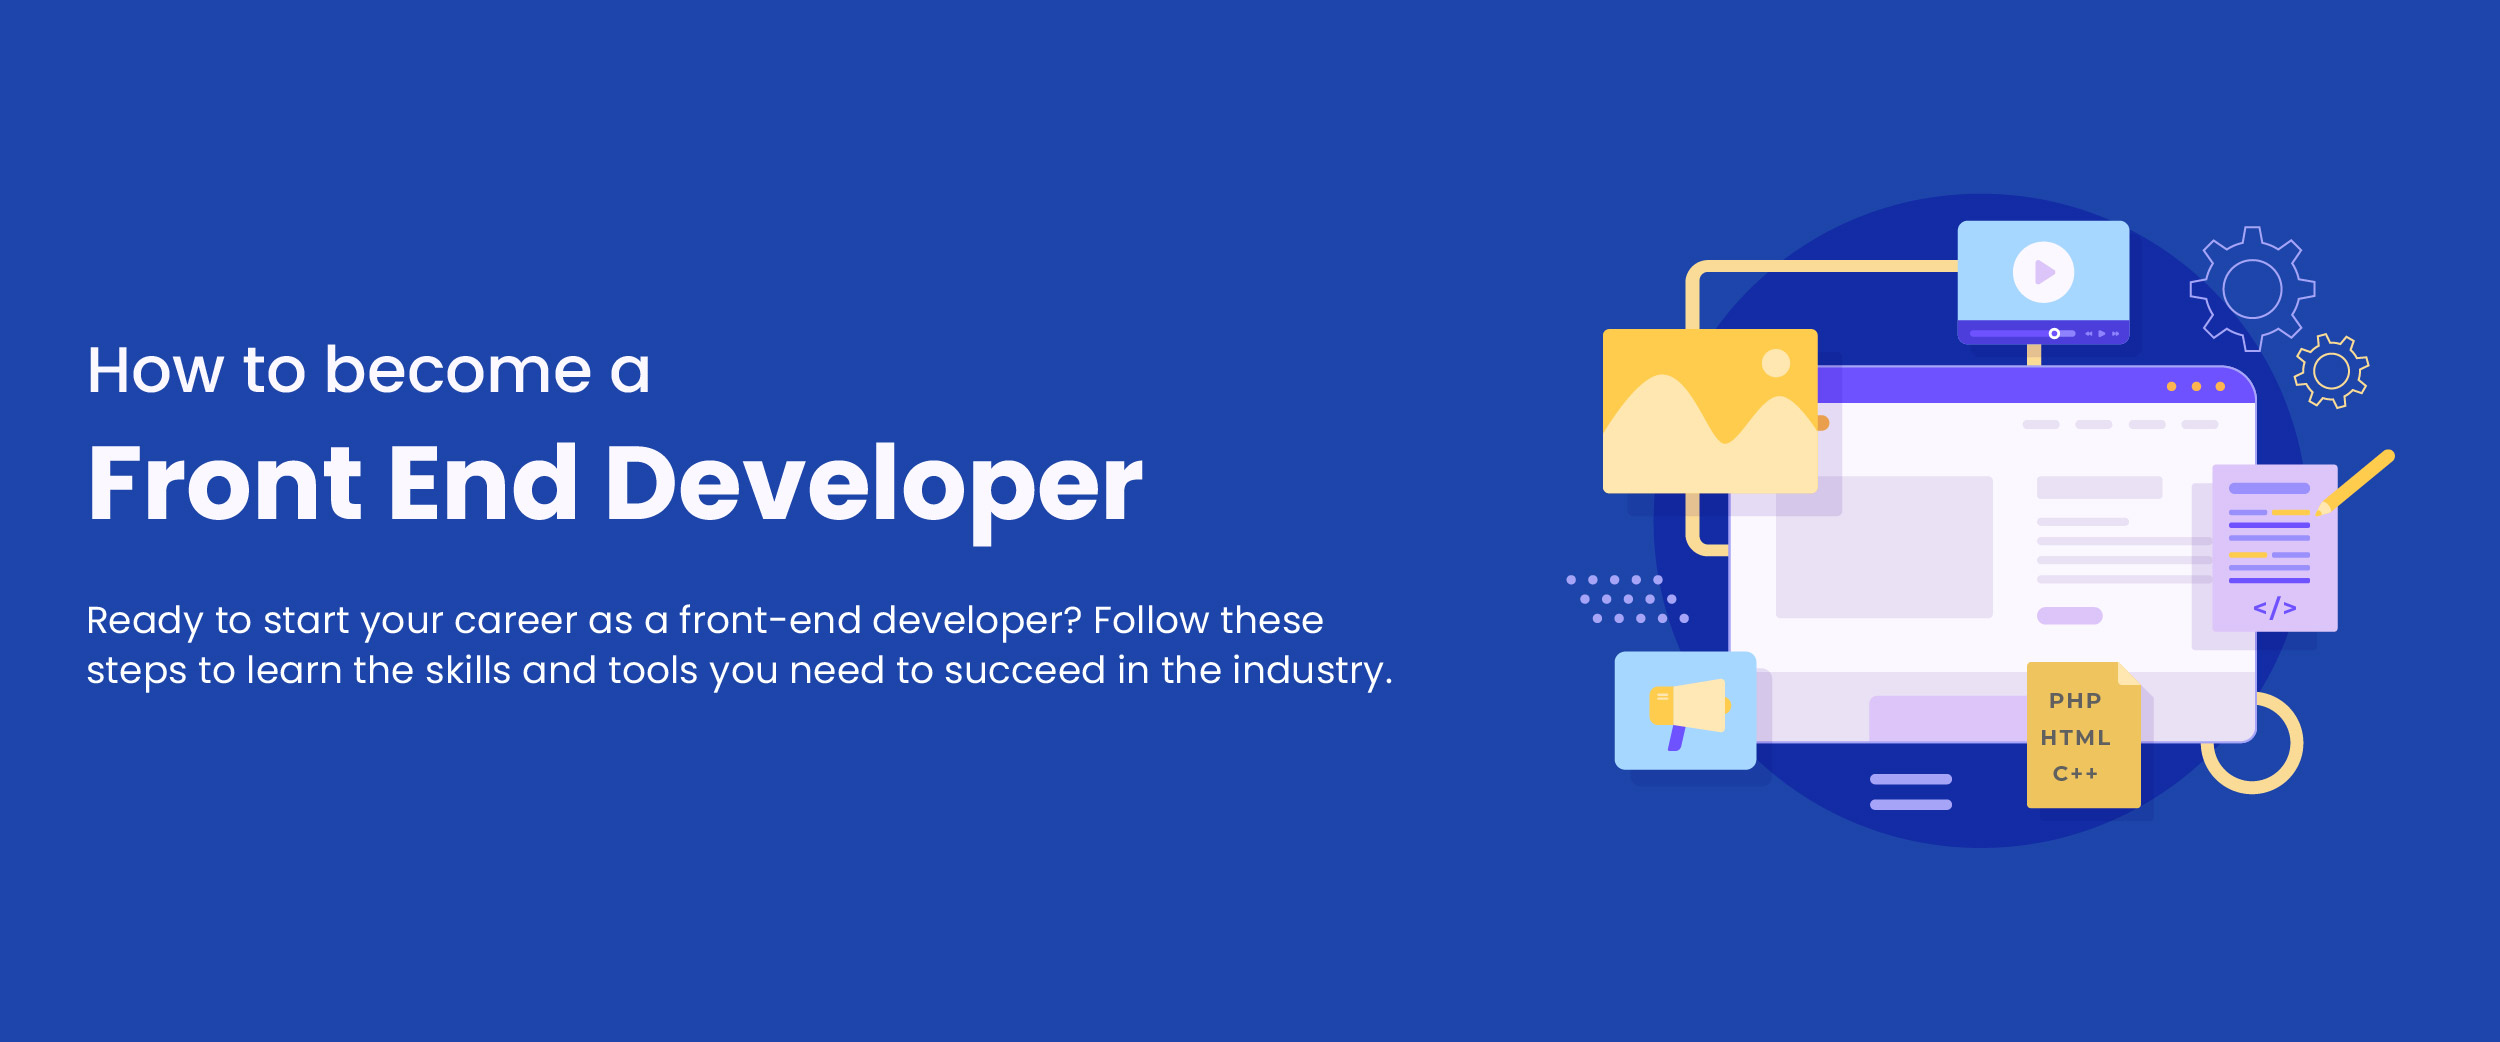 how to become a front end developer